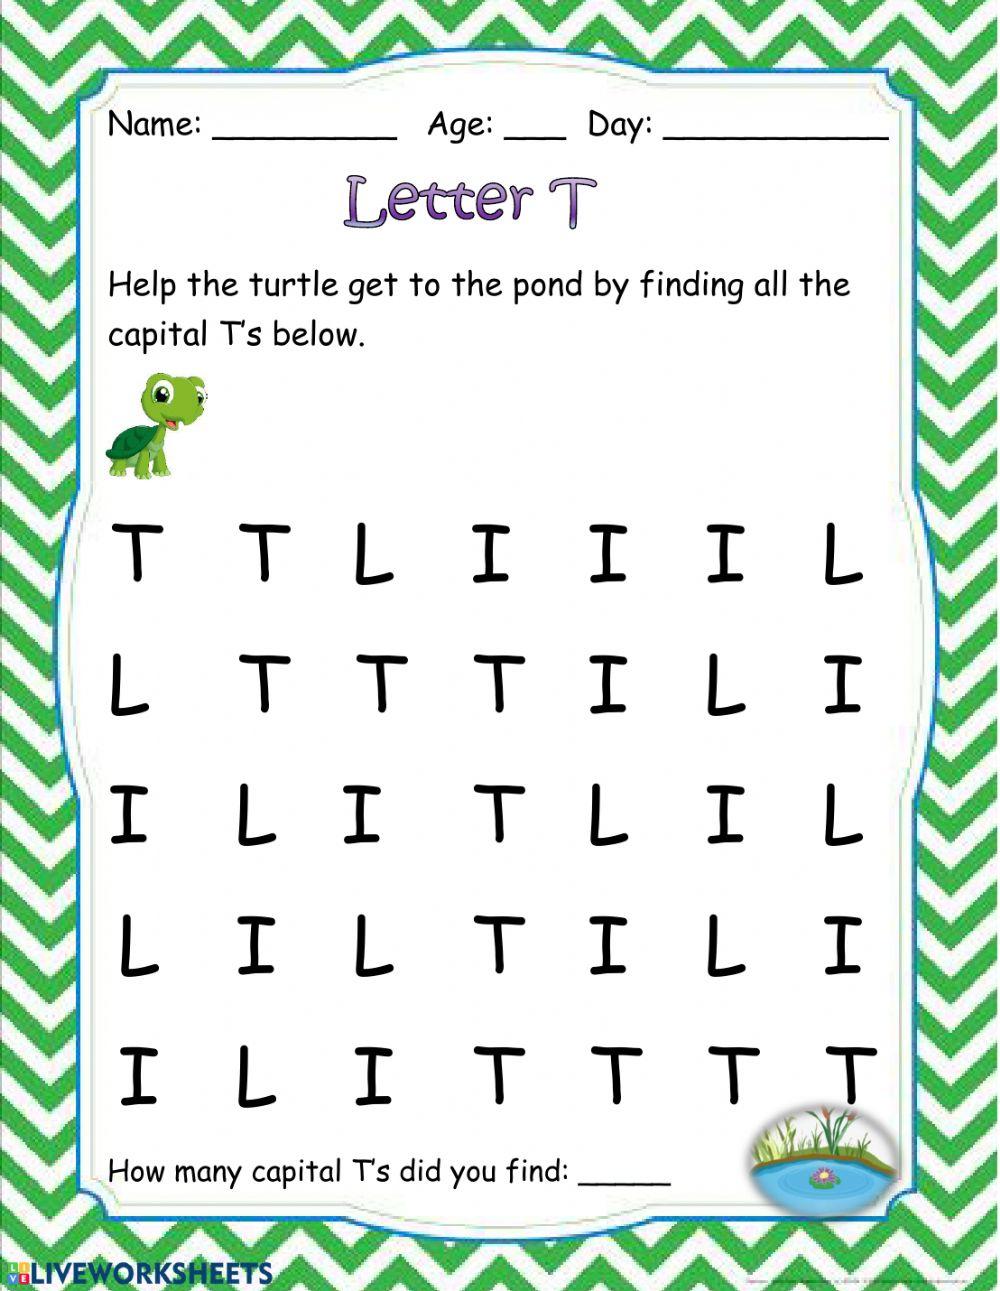 Capital T letter Search